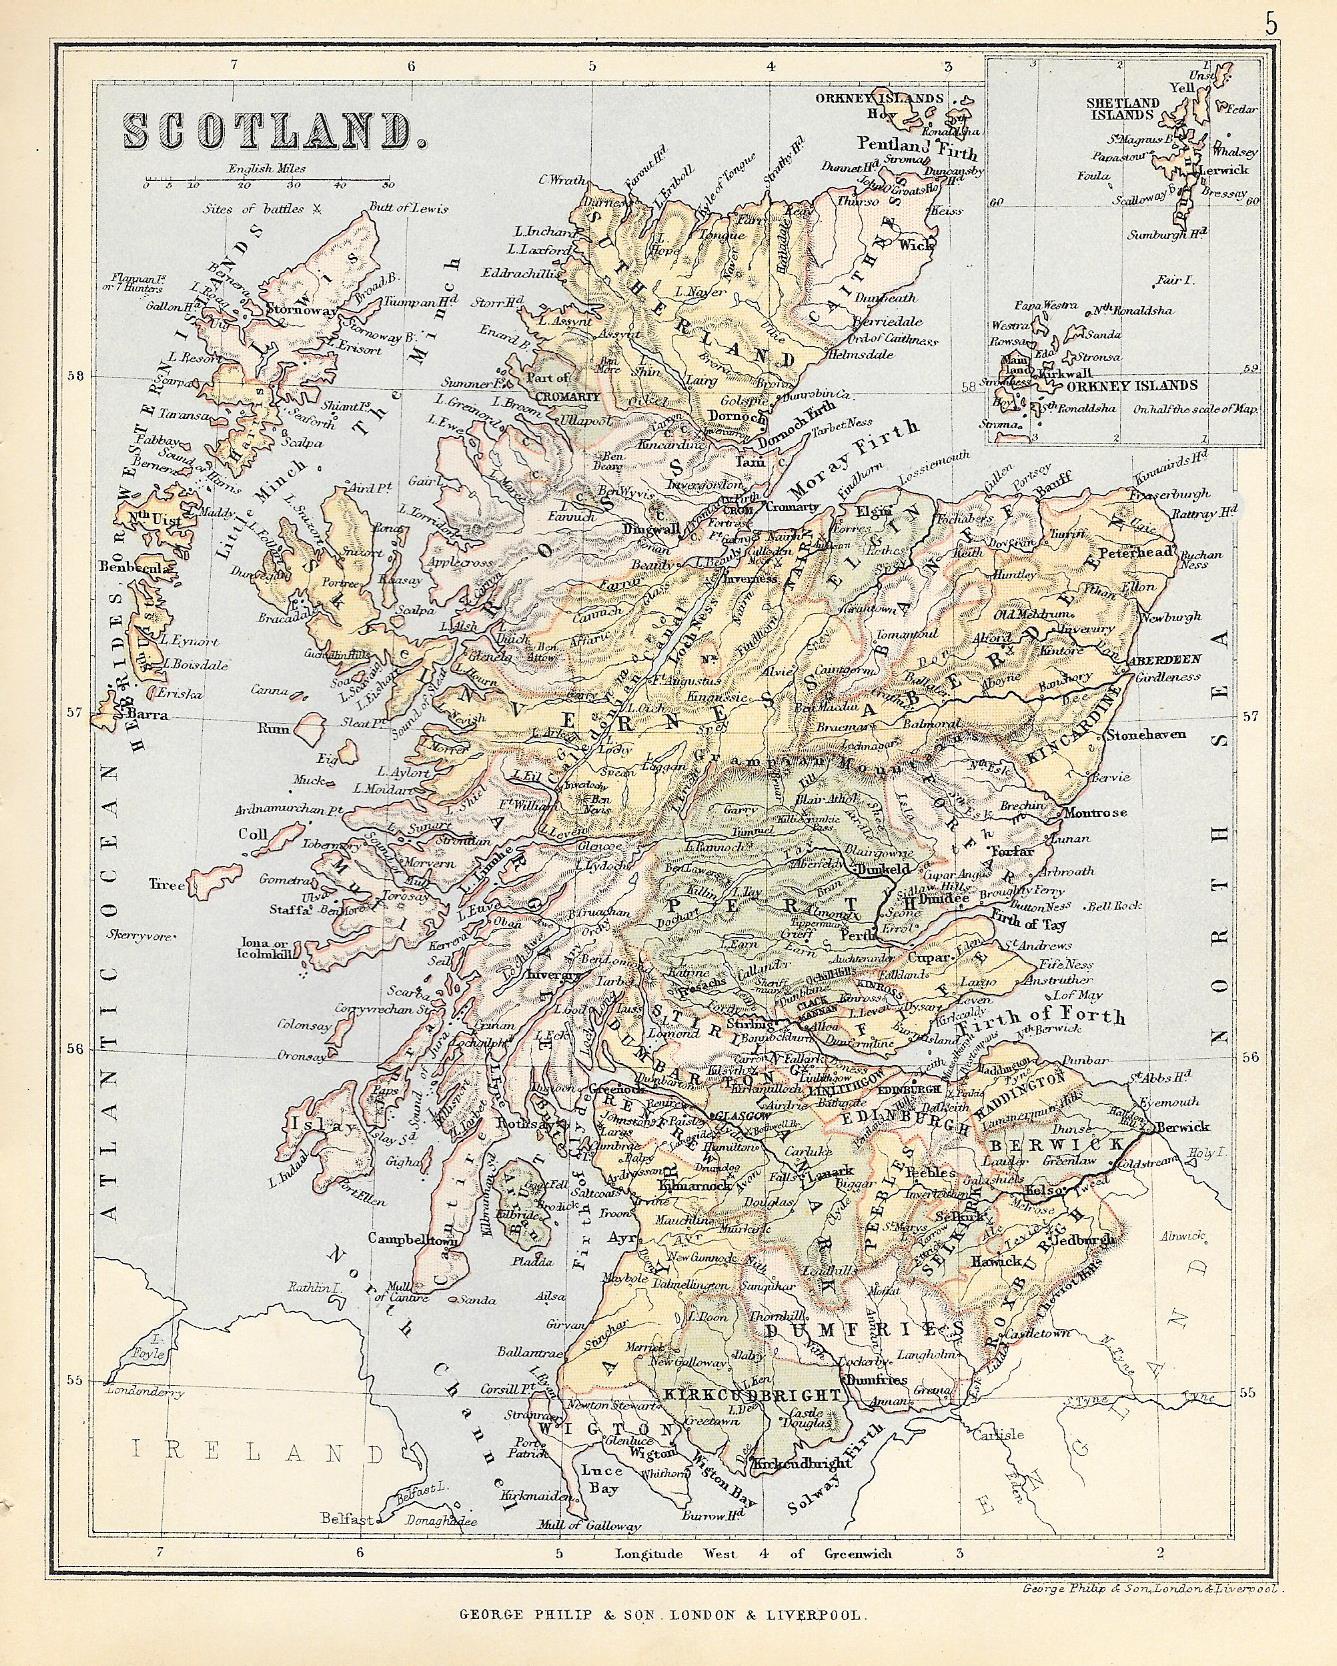 Scotland antique map by George Philip & Son